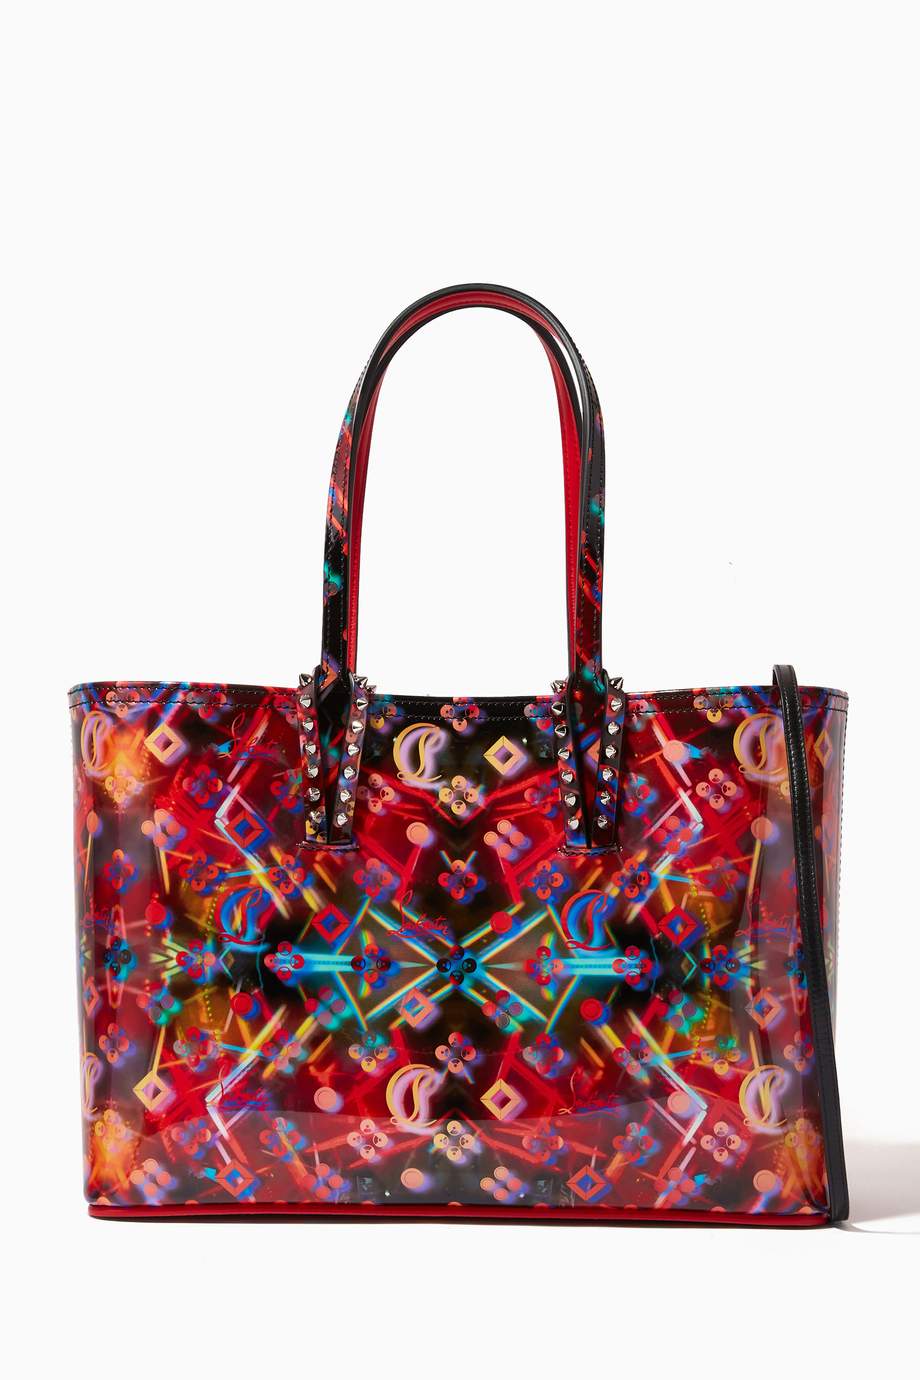 Shop Christian Louboutin Multicolour Cabata N/S Small Bag in Graphic Patent Leather for Women | Ounass UAE